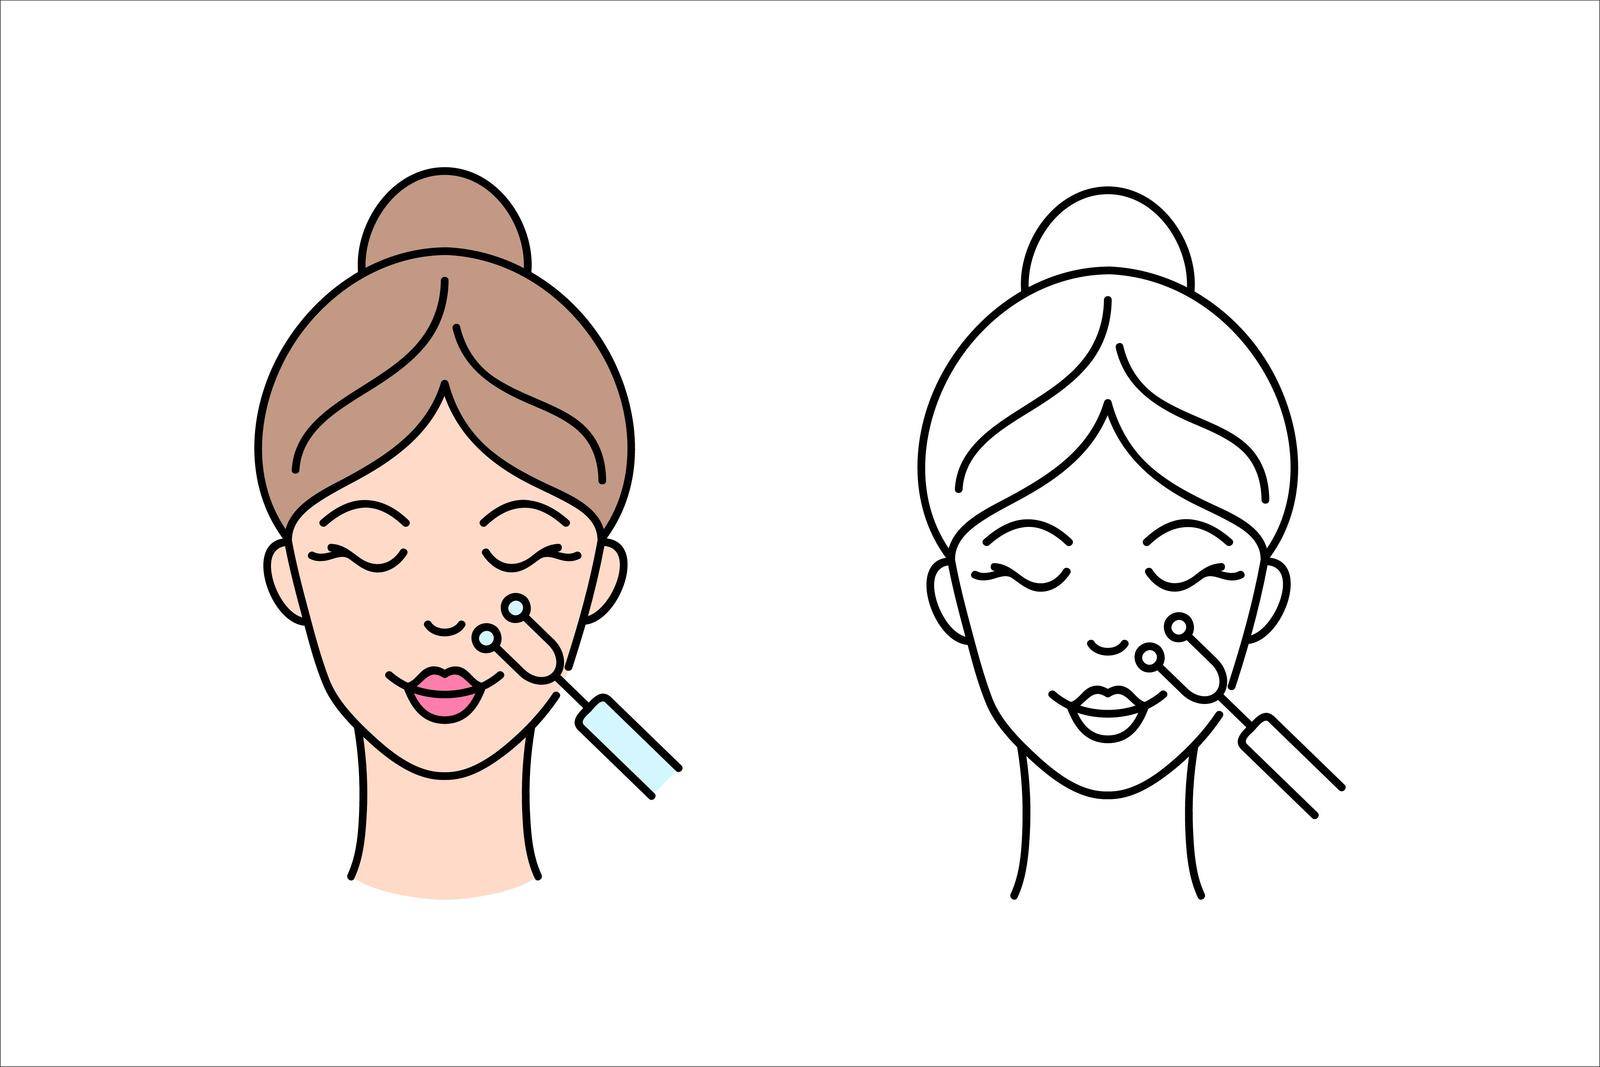 Micro current medicine treatment. Facial treatment with galvanic.. Icons in line art style for beauty industry..